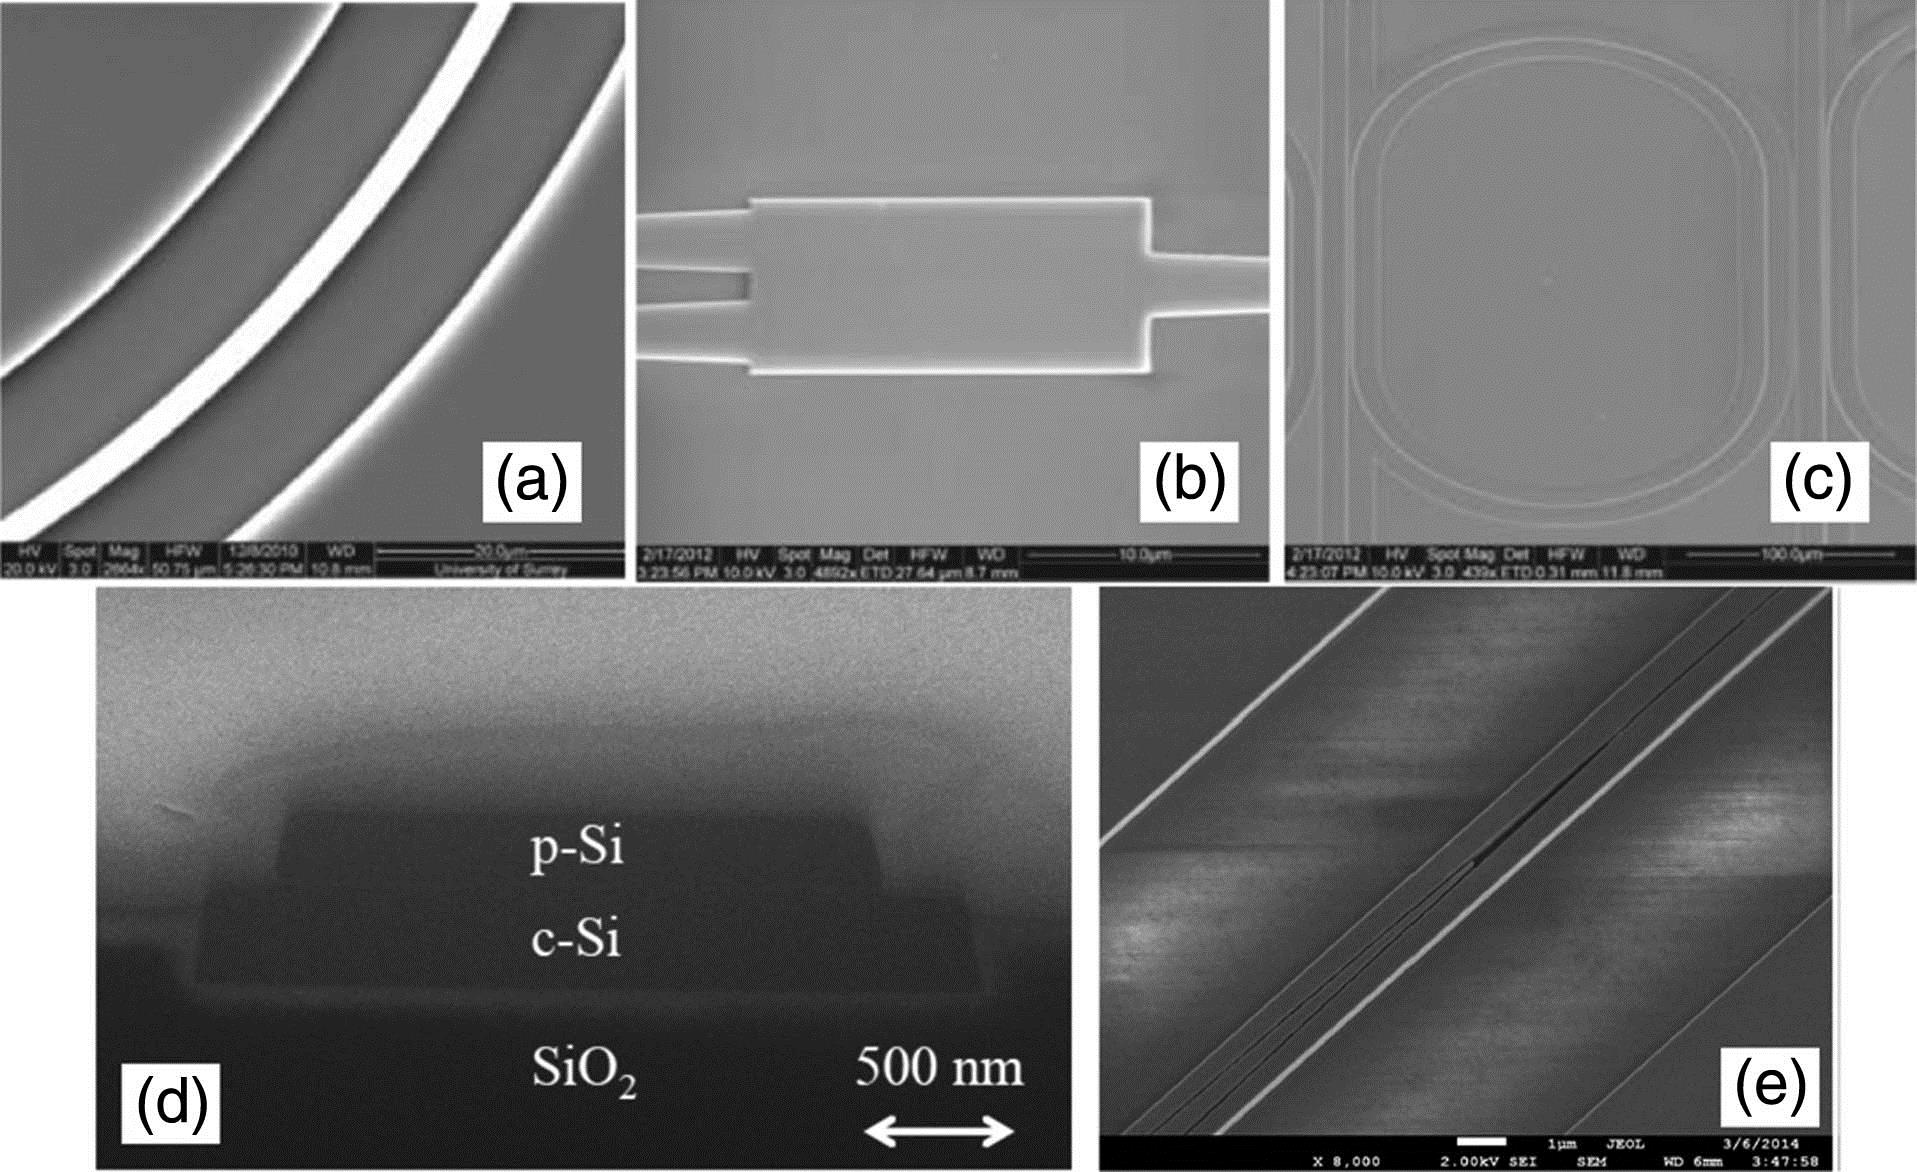 Passive devices on SOI with a thicker silicon layer. SEM images of strip-waveguide-based (a) bending [61]; (b) MMI device [61]; (c) racetrack resonator [61]. (d) SEM cross section image of a waveguide implemented in the imecAP process where the thickness of the p-Si layer is 160 nm and the thickness of c-Si is 220 nm [39]. (e) SEM image of the mode converter between a strip waveguide and a slot waveguide [62]. Figures are reproduced from: (a)–(c) Ref. [61]; (d) Ref. [39]; (e) Ref. [62].